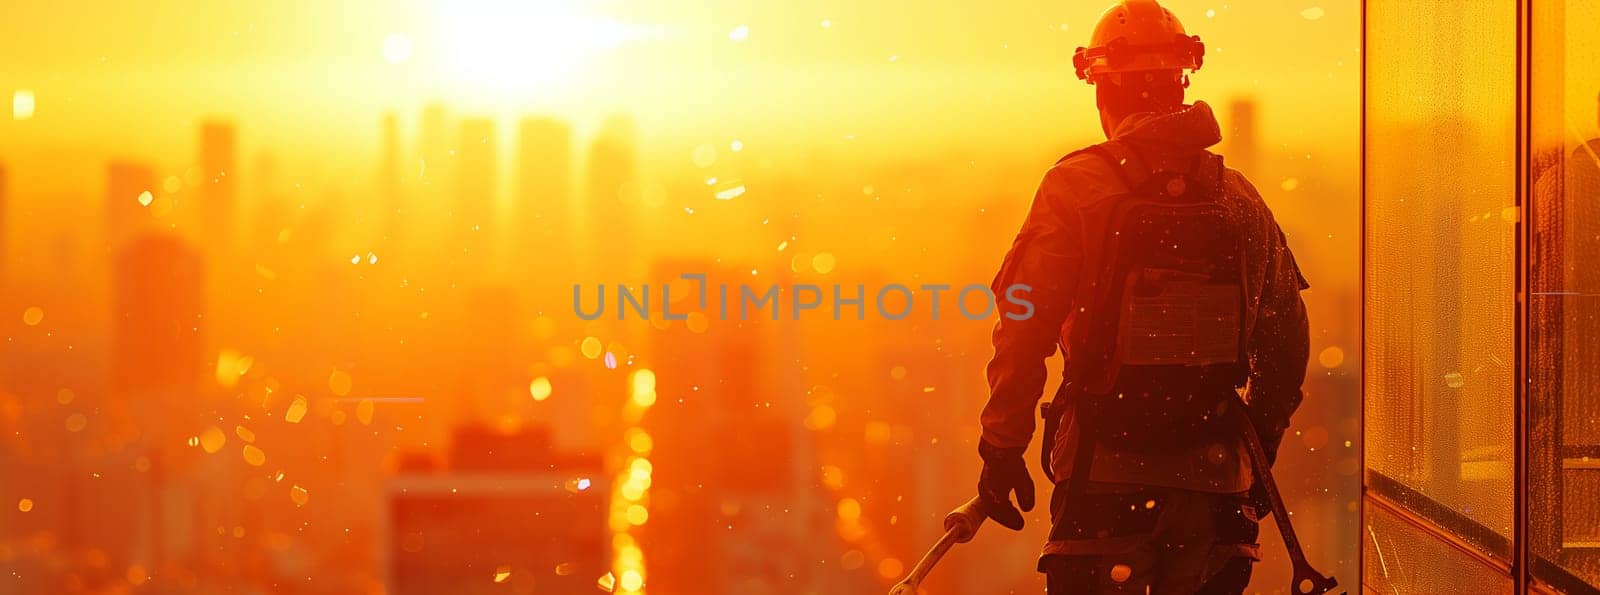 The double exposure image of the engineer standing on the rooftop overlay with cityscape image and. The concept of engineering, construction, city life and future. High quality photo